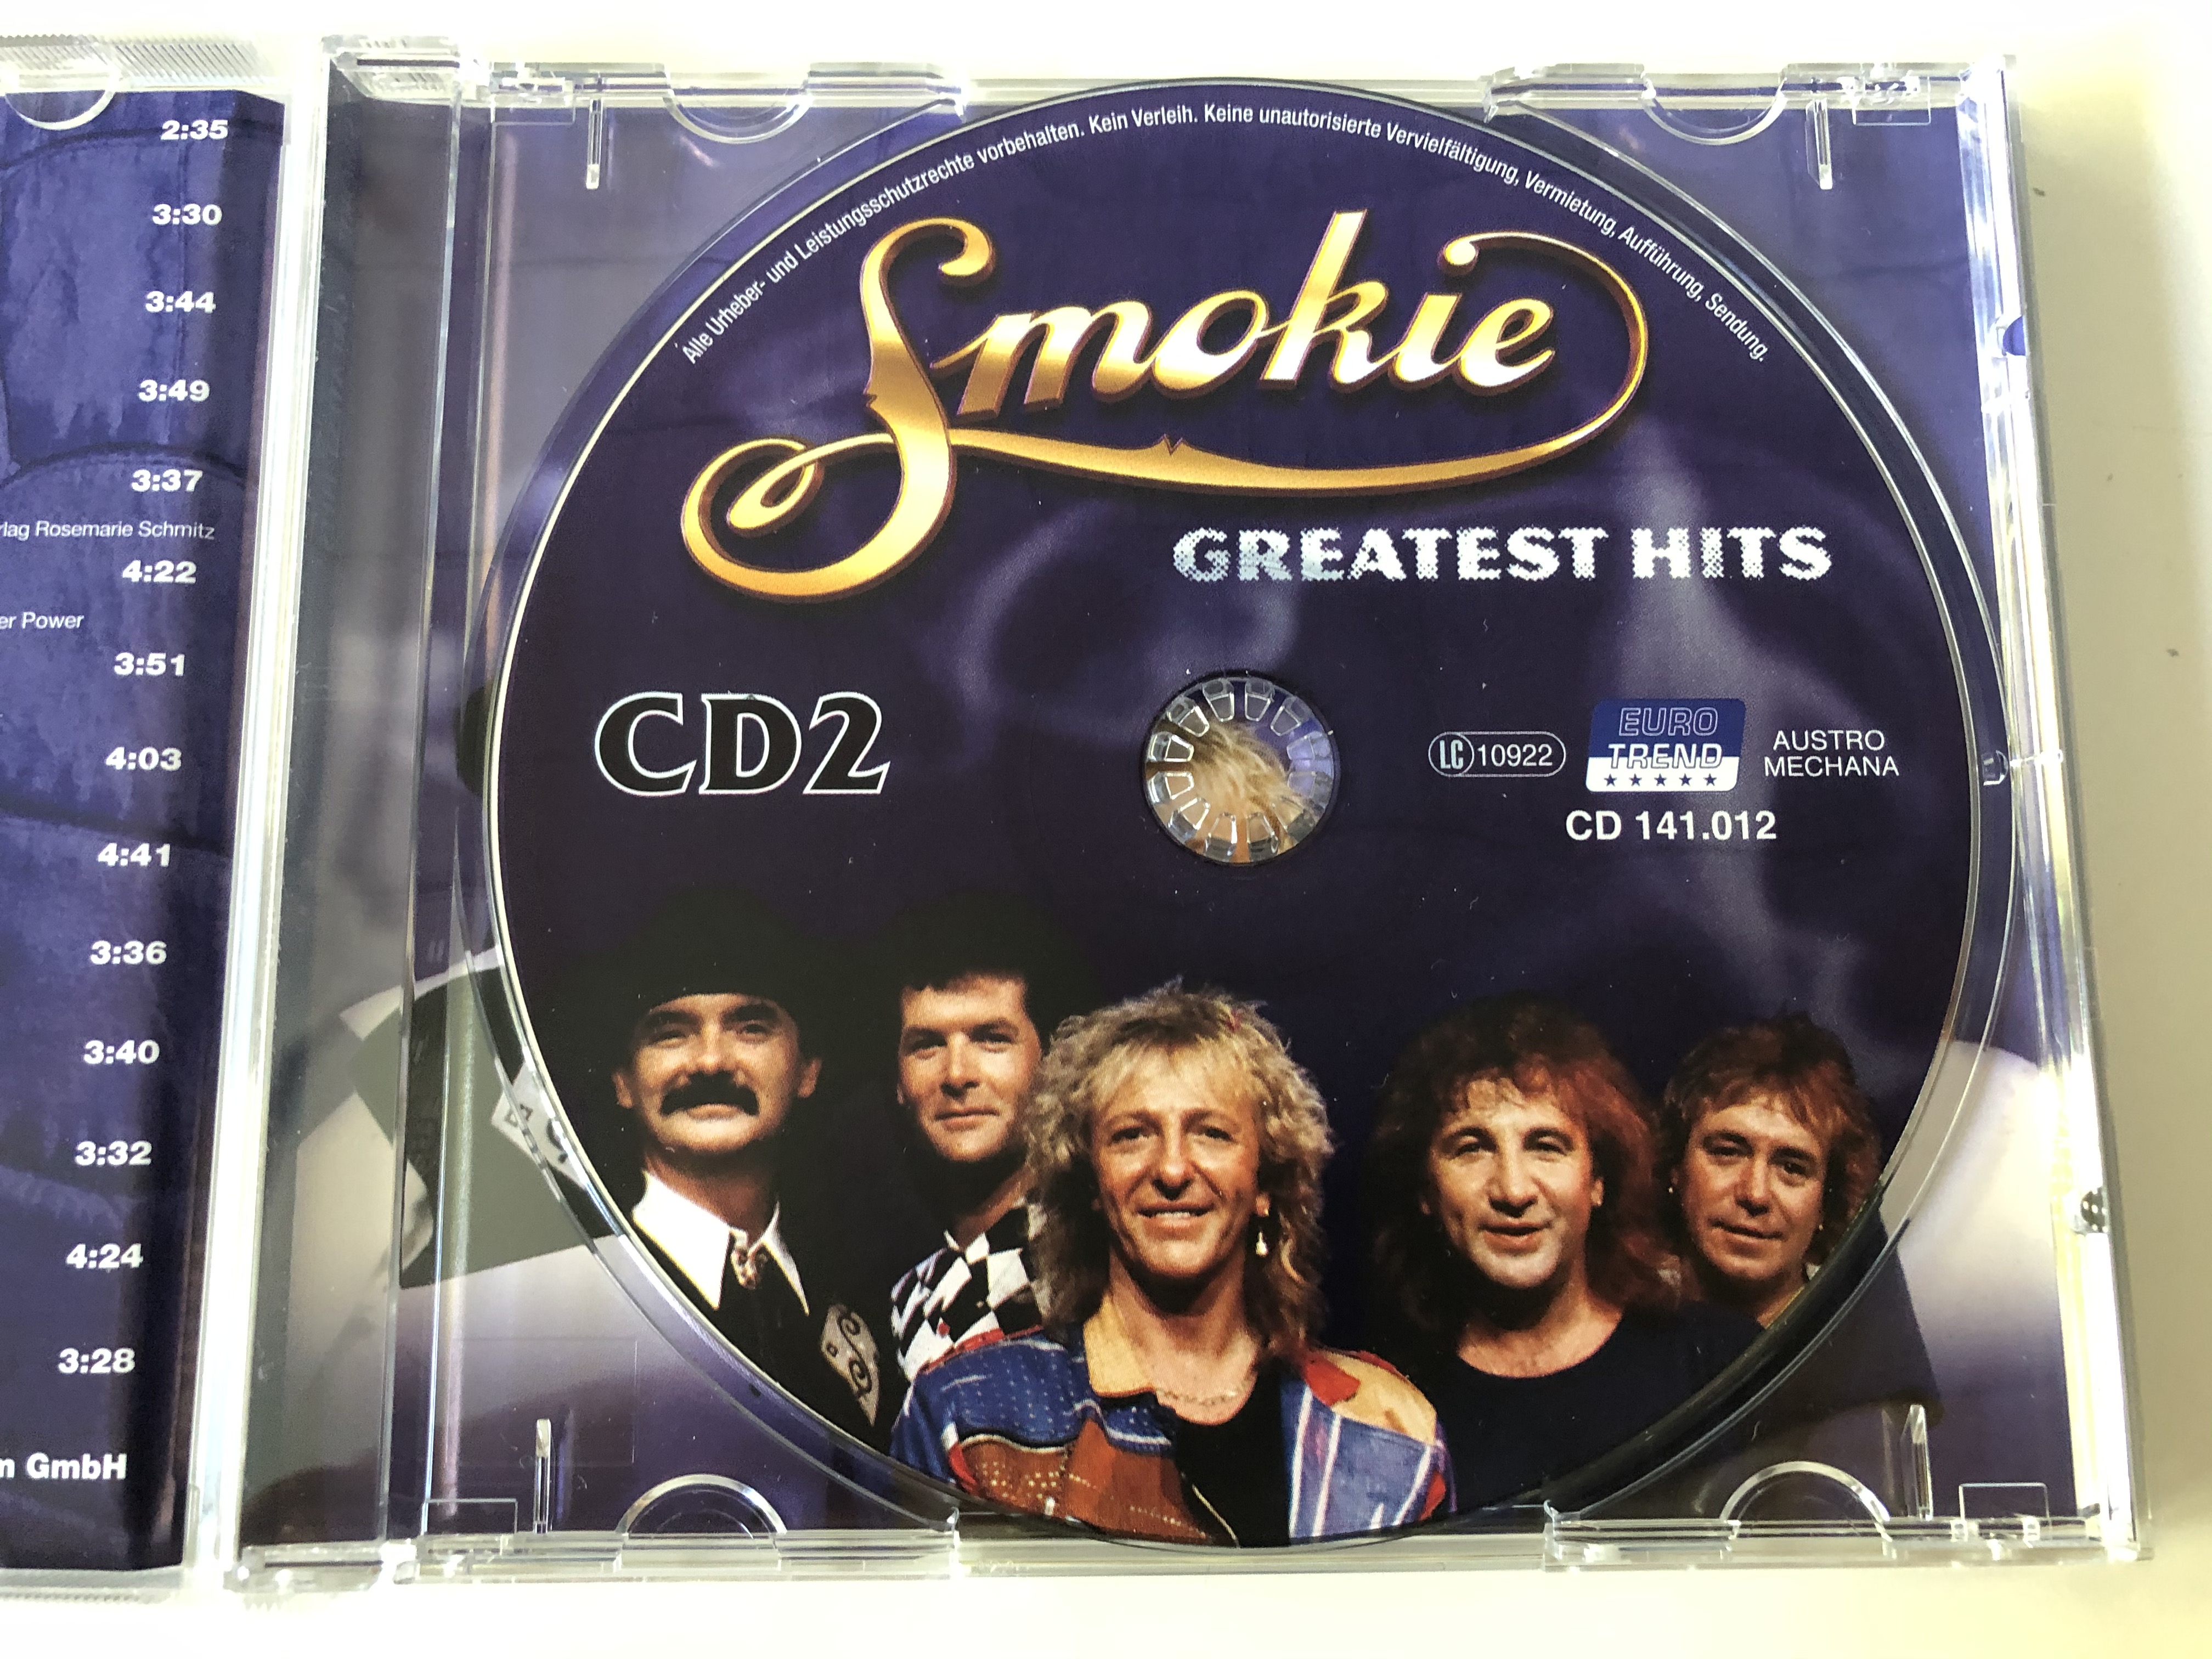 smokie-greatest-hits-cd-2-needles-and-pins-it-s-your-life-for-a-few-dollars-more-arms-of-mary-wild-wild-angels-take-good-care-of-my-baby-a.m.o.-eurotrend-audio-cd-cd-141-3-.jpg